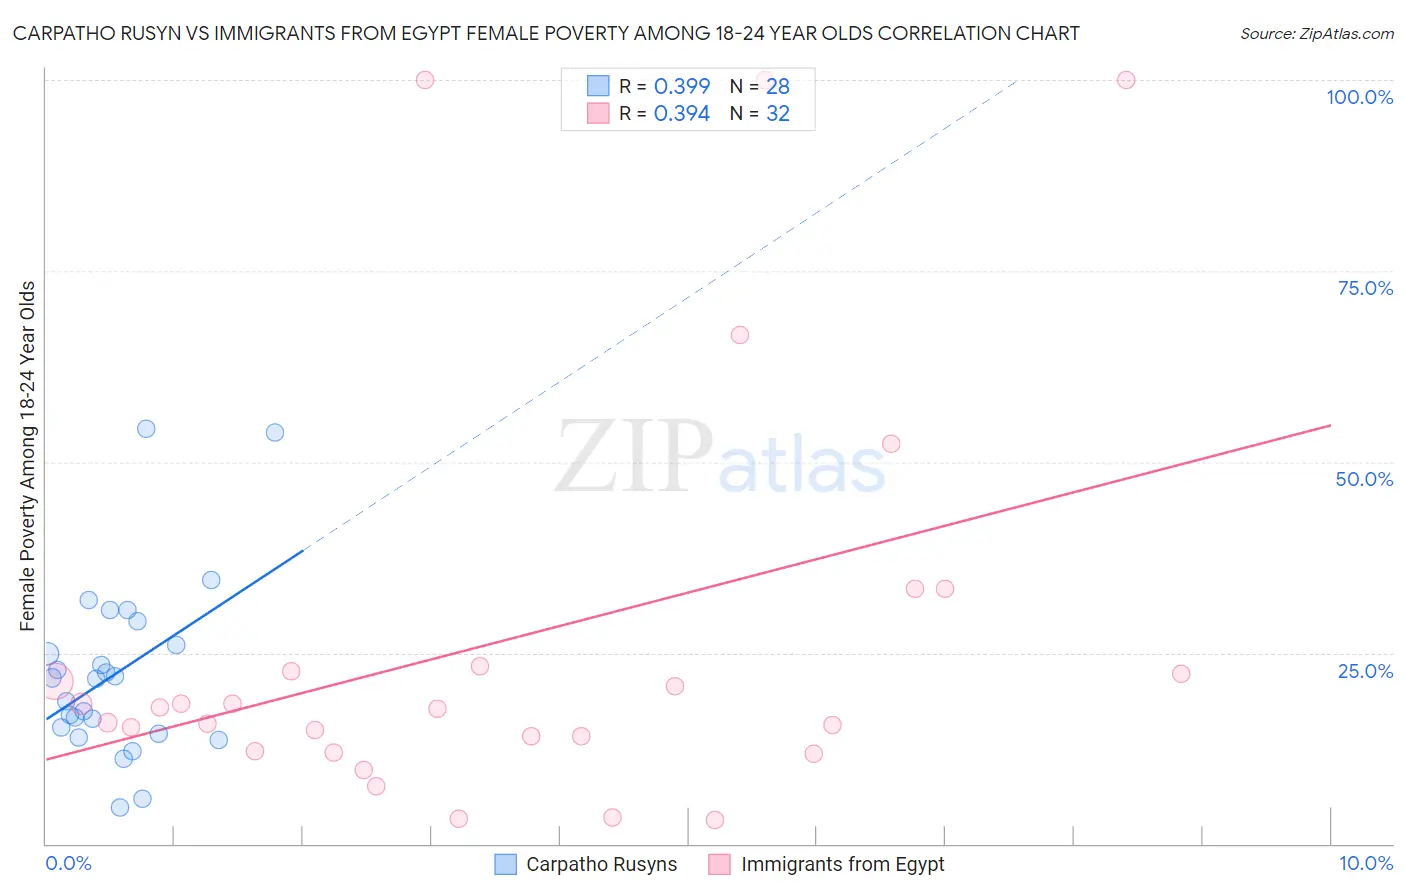 Carpatho Rusyn vs Immigrants from Egypt Female Poverty Among 18-24 Year Olds